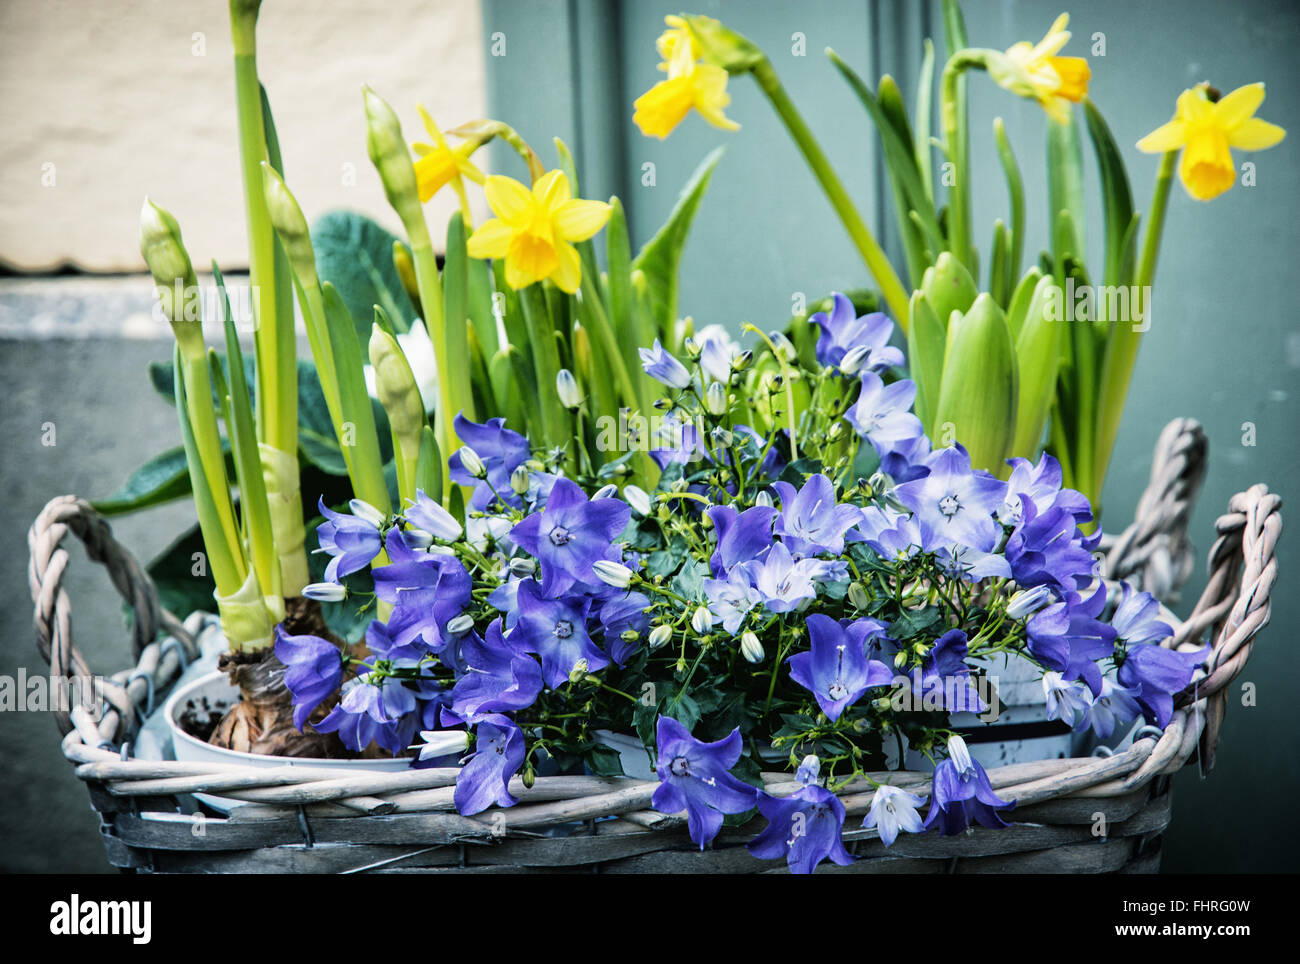 Bluebells and yellow daffodils in the wicker basket. Symbol of spring. Gardening theme. Natural decoration. Stock Photo